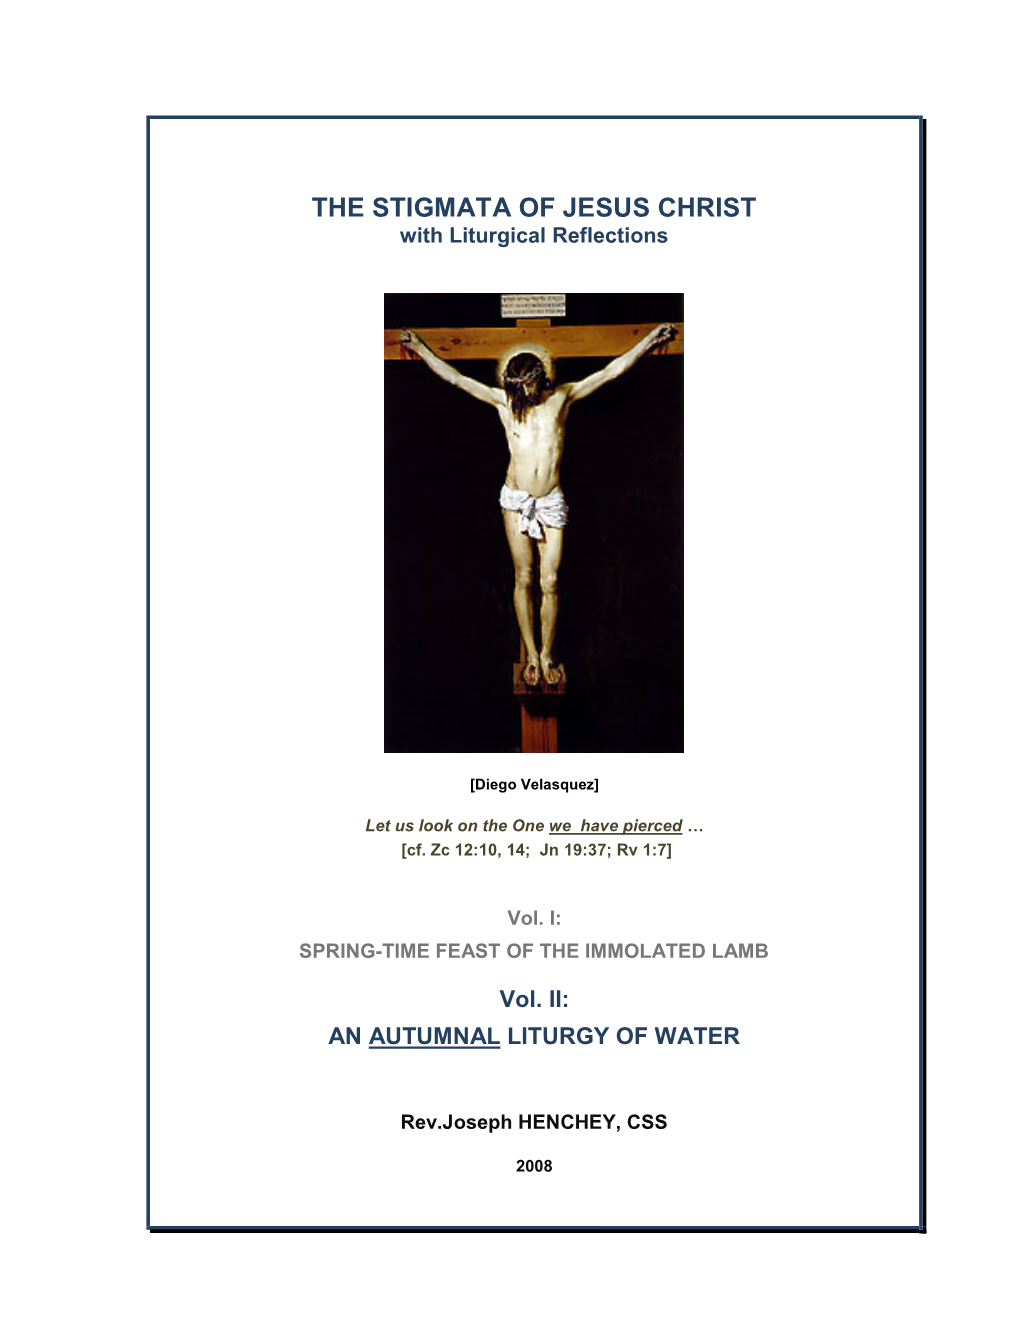 THE STIGMATA of JESUS CHRIST with Liturgical Reflections